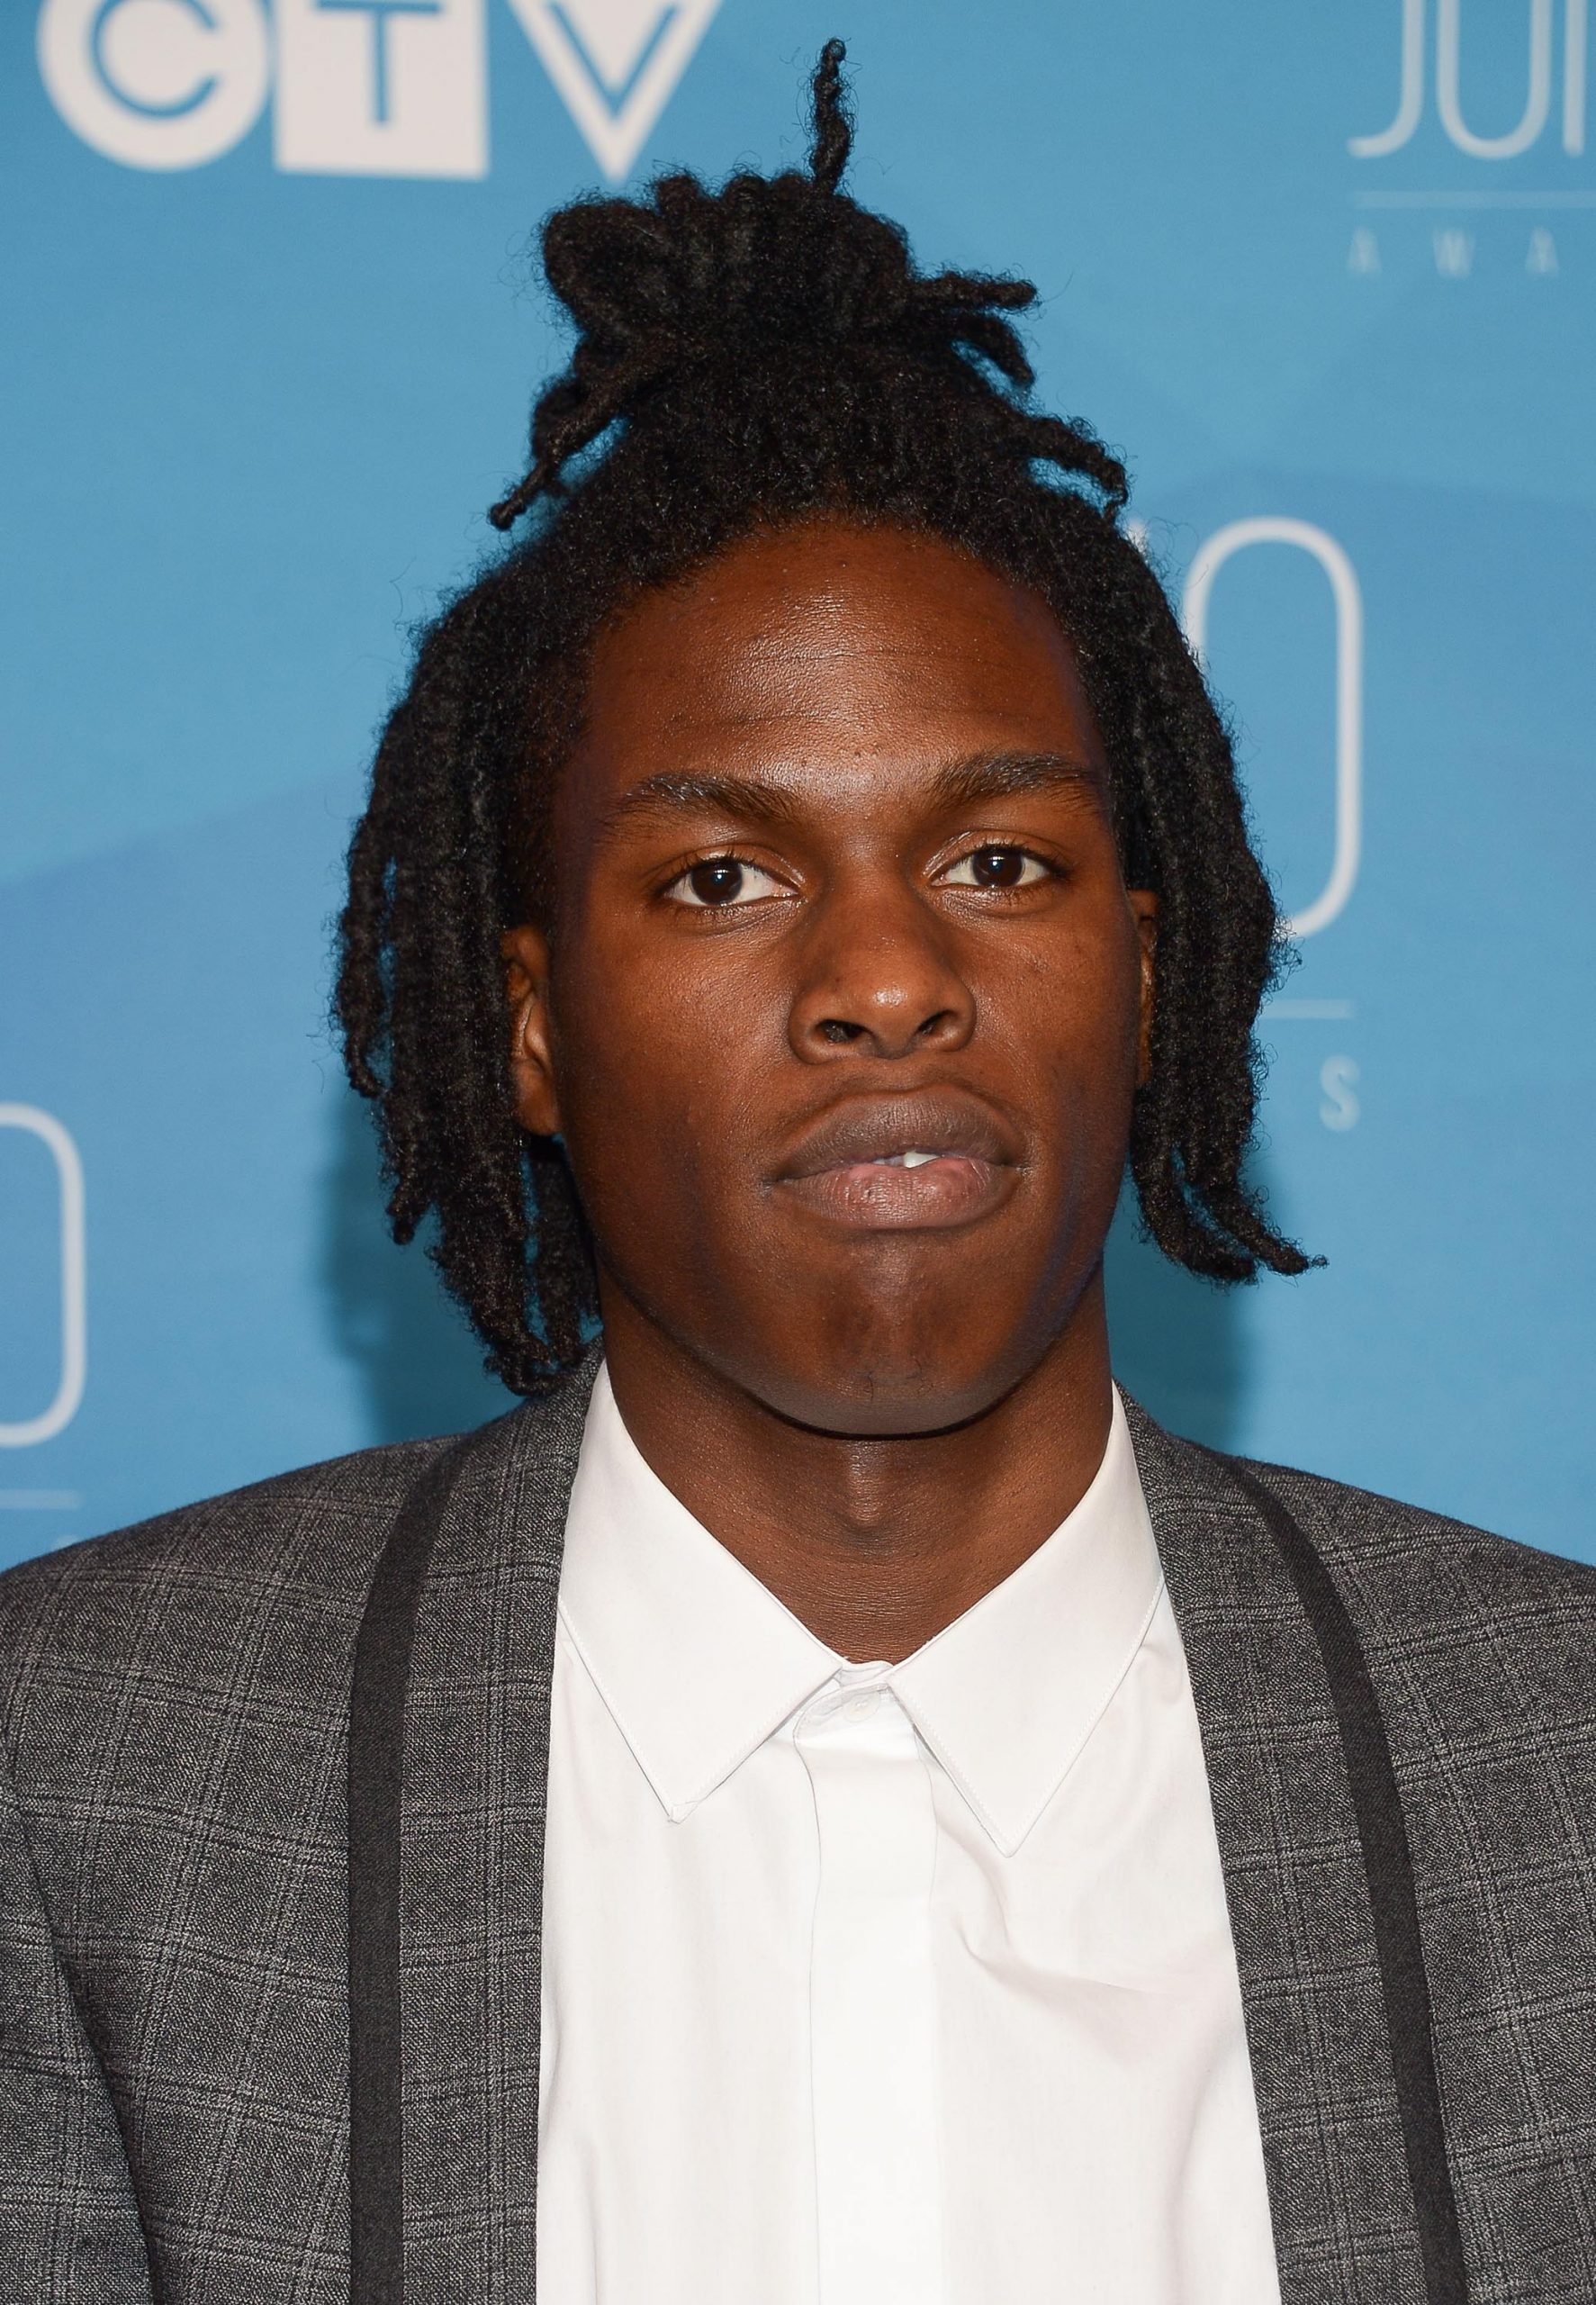 What Happened to R&B Star Daniel Caesar After He Invited Fans to Cancel